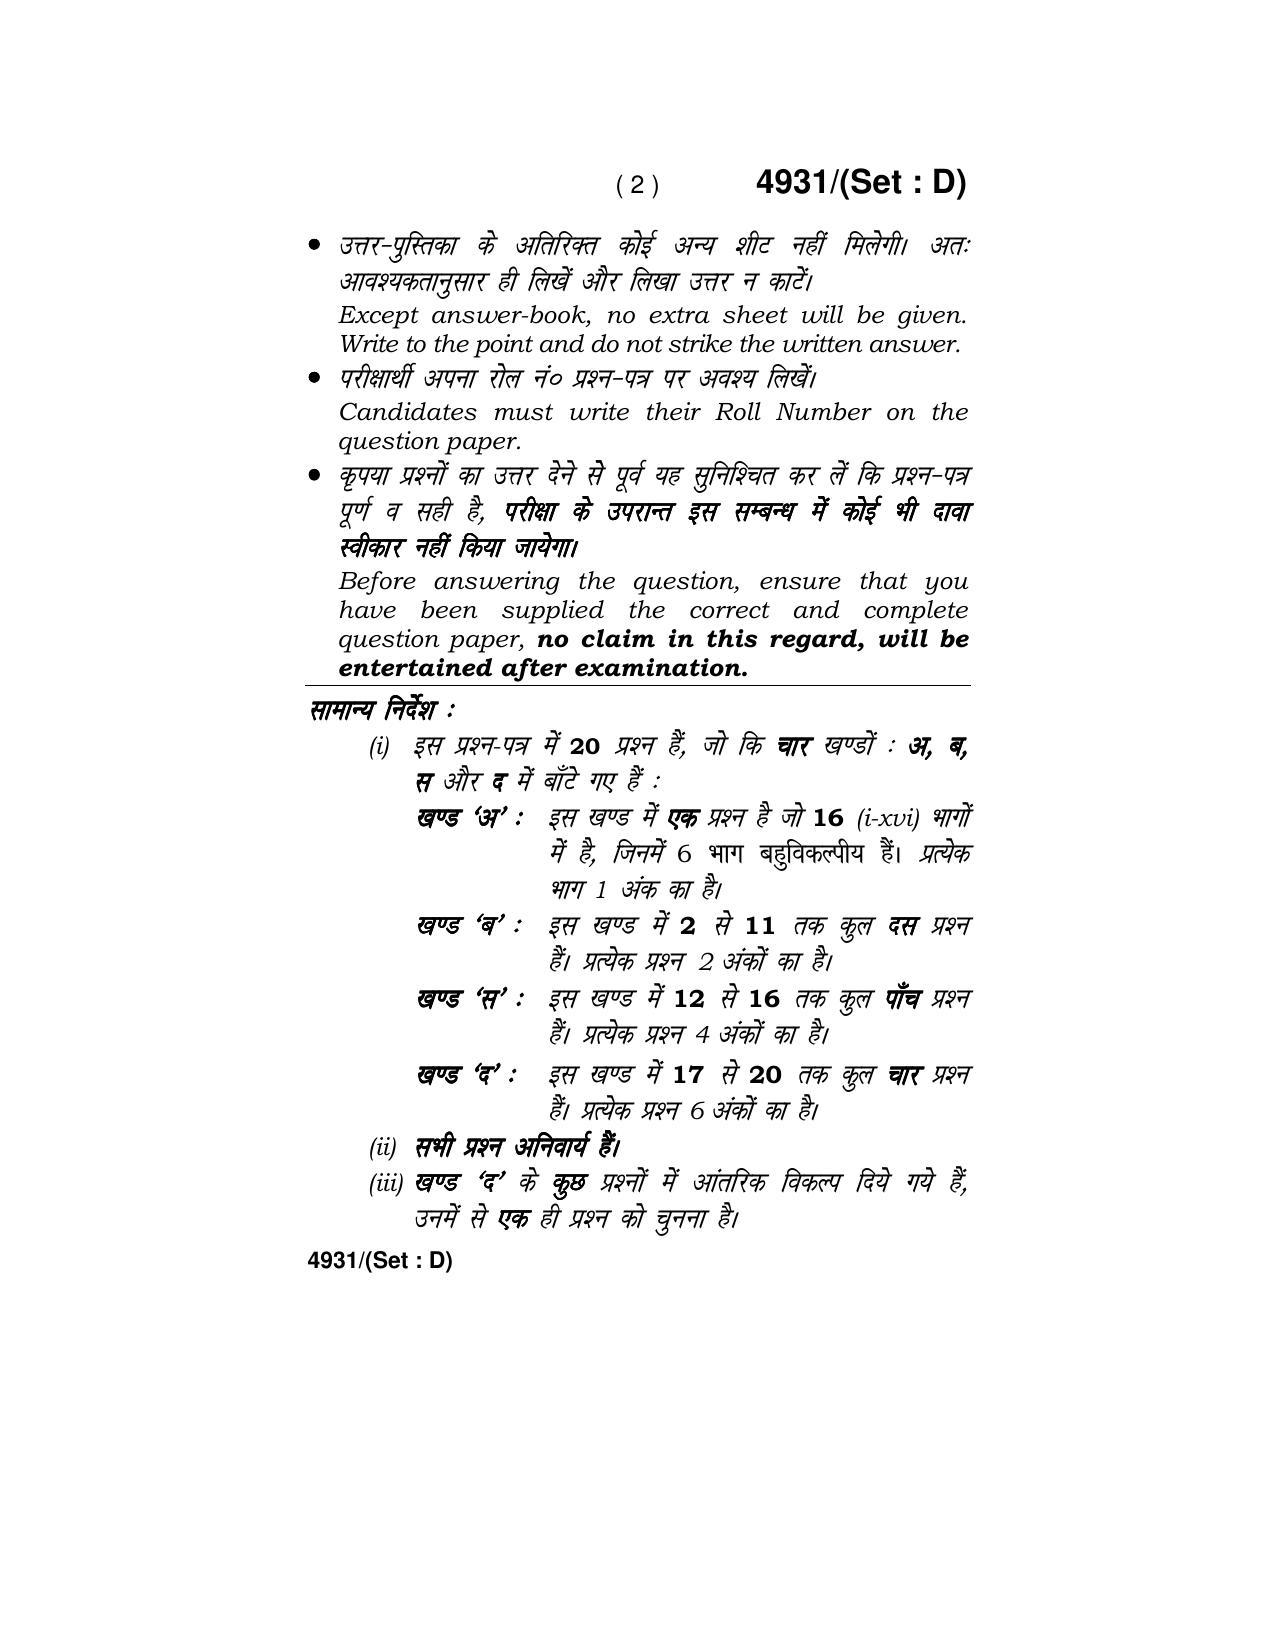 Haryana Board HBSE Class 12 Mathematics 2020 Question Paper - Page 50